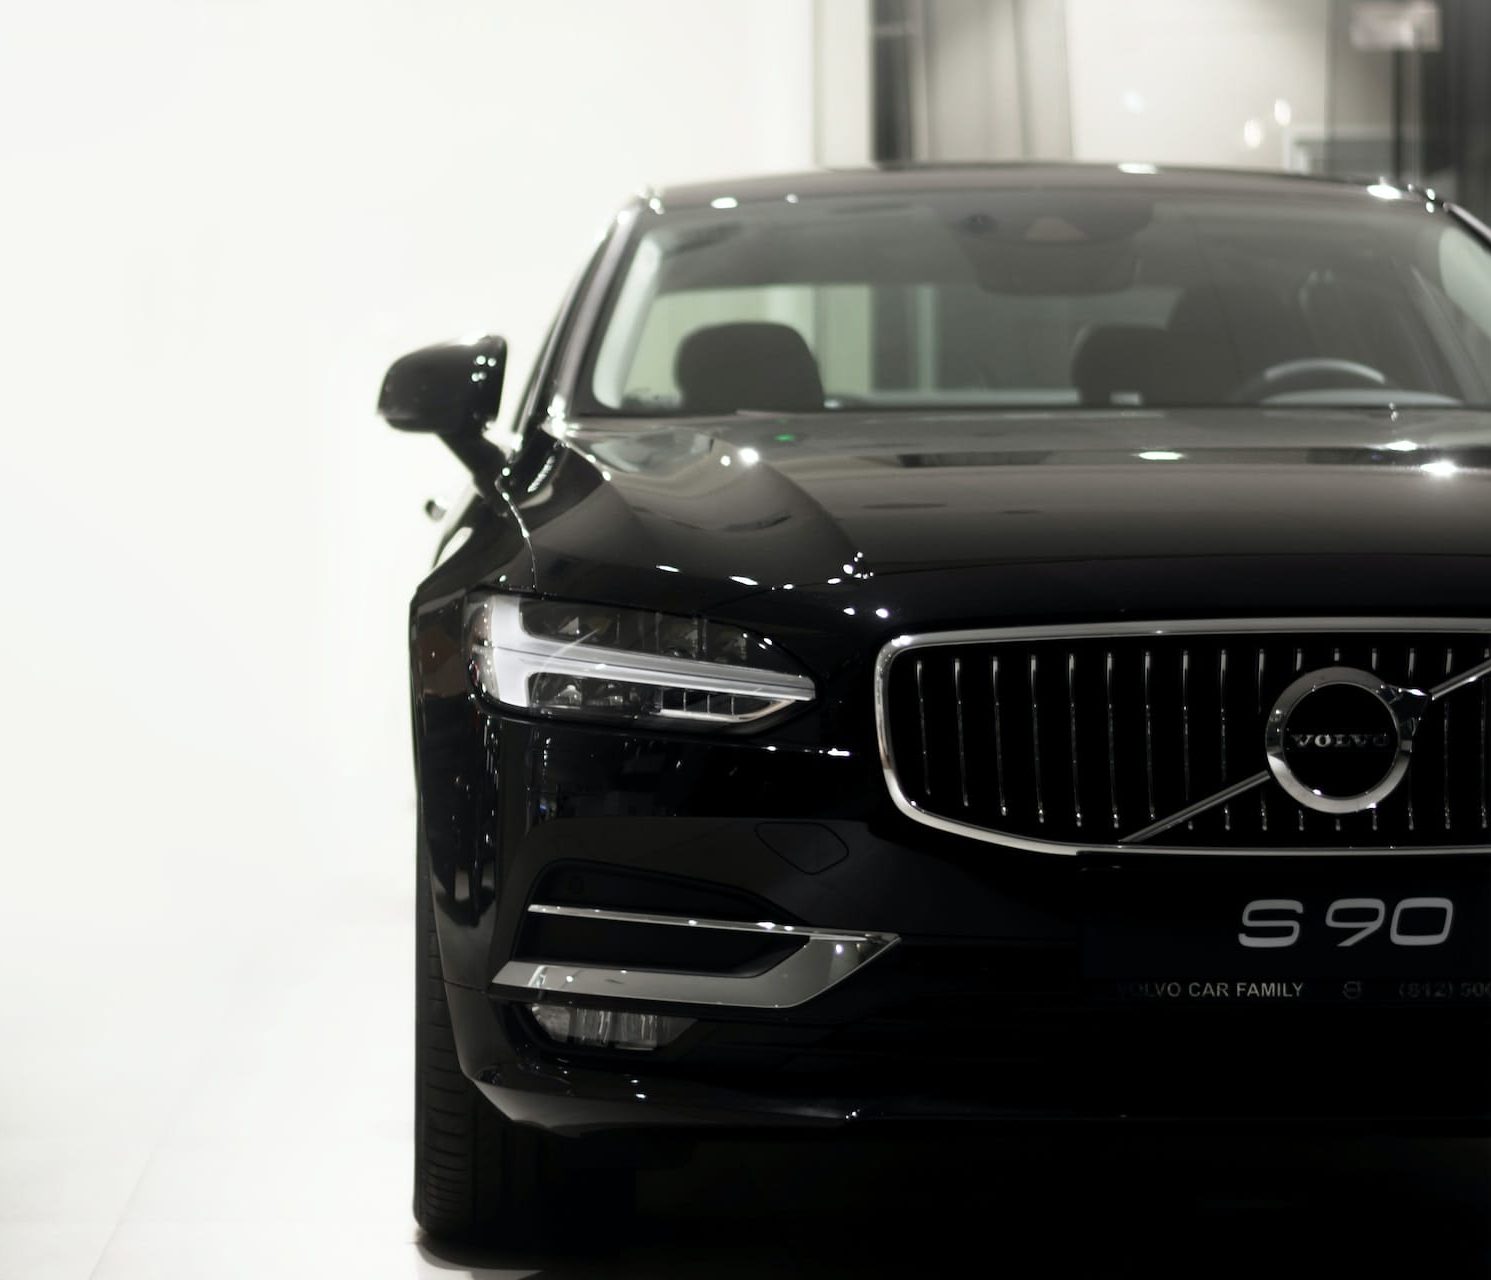 What You Must Understand Before Transporting a Volvo S90